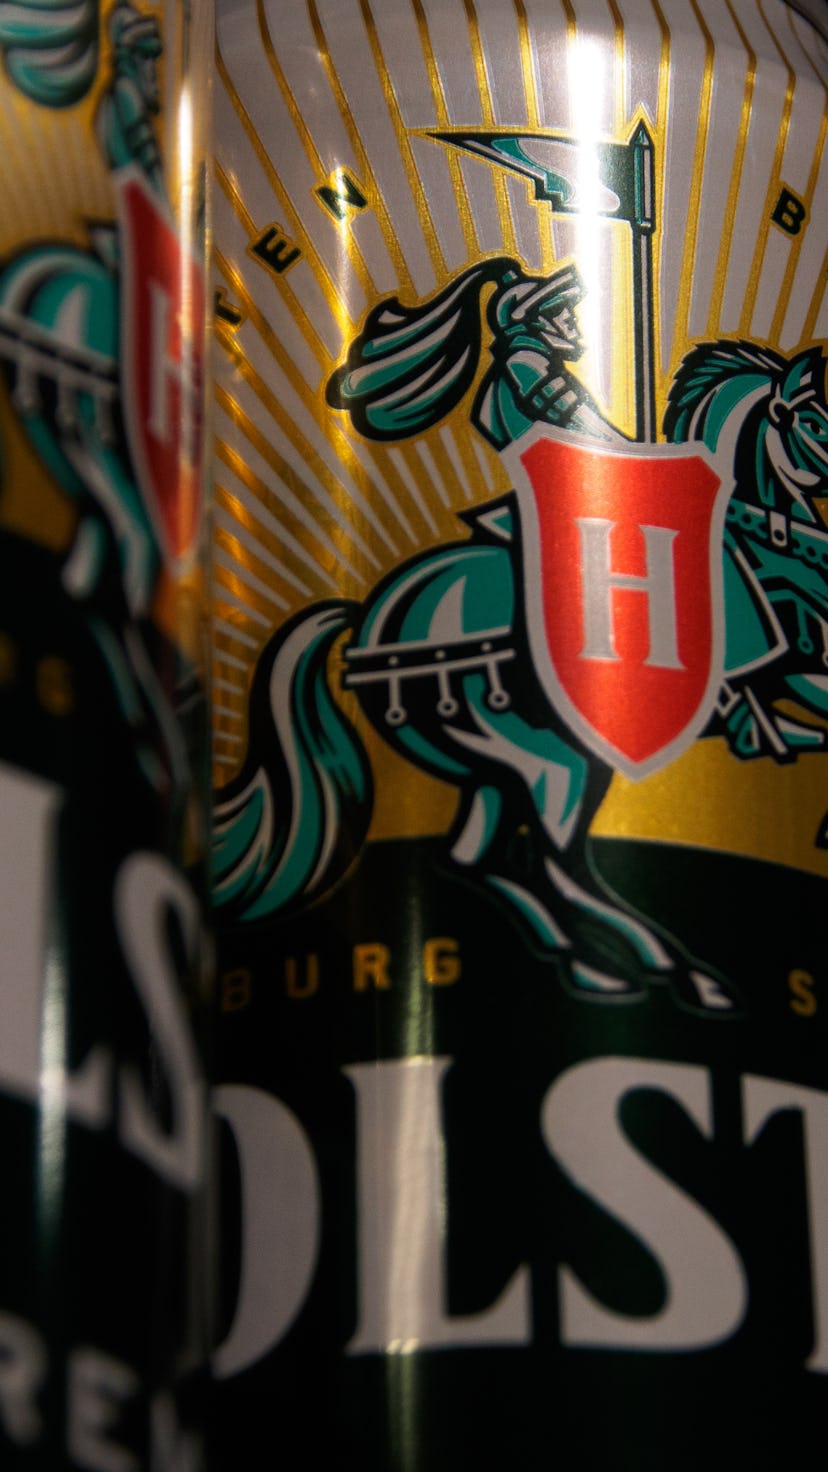 MOSCOW, RUSSIA - 2022/03/31: Holsten logo seen on beer cans. It was reported that Carlsberg Group is...